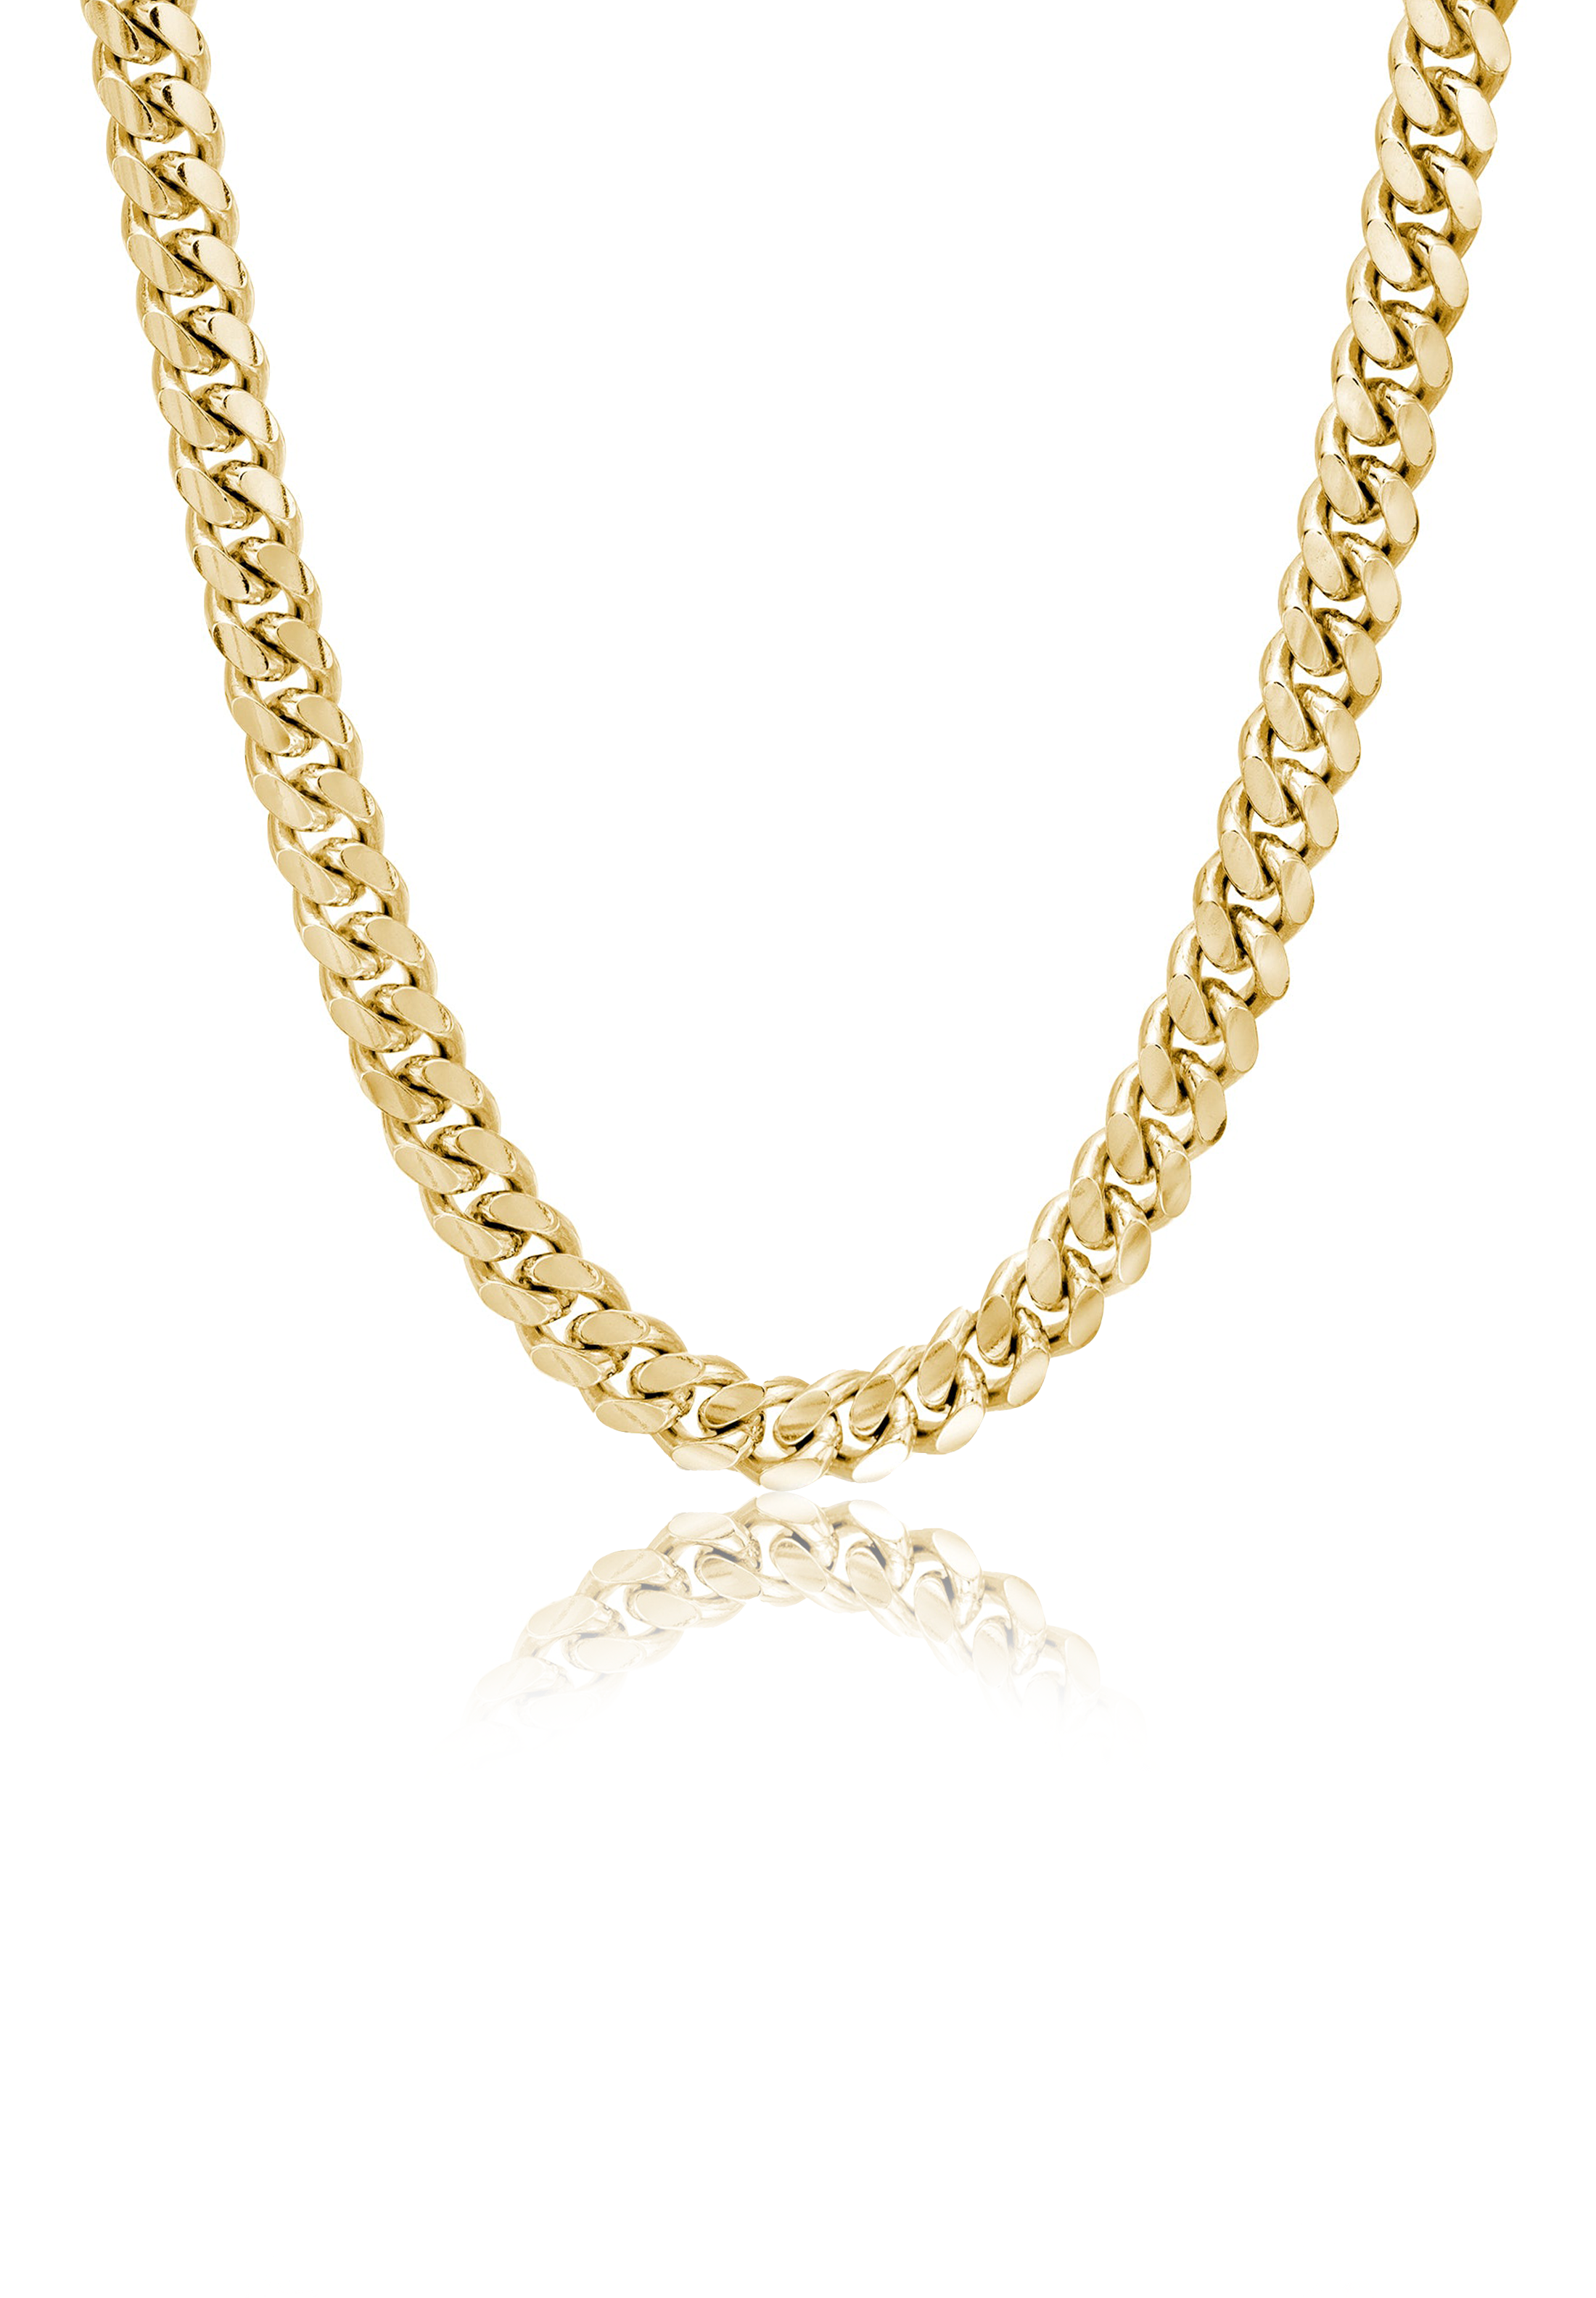 Solid Gold Cuban Link Chain (6mm) - Fenom & Co.